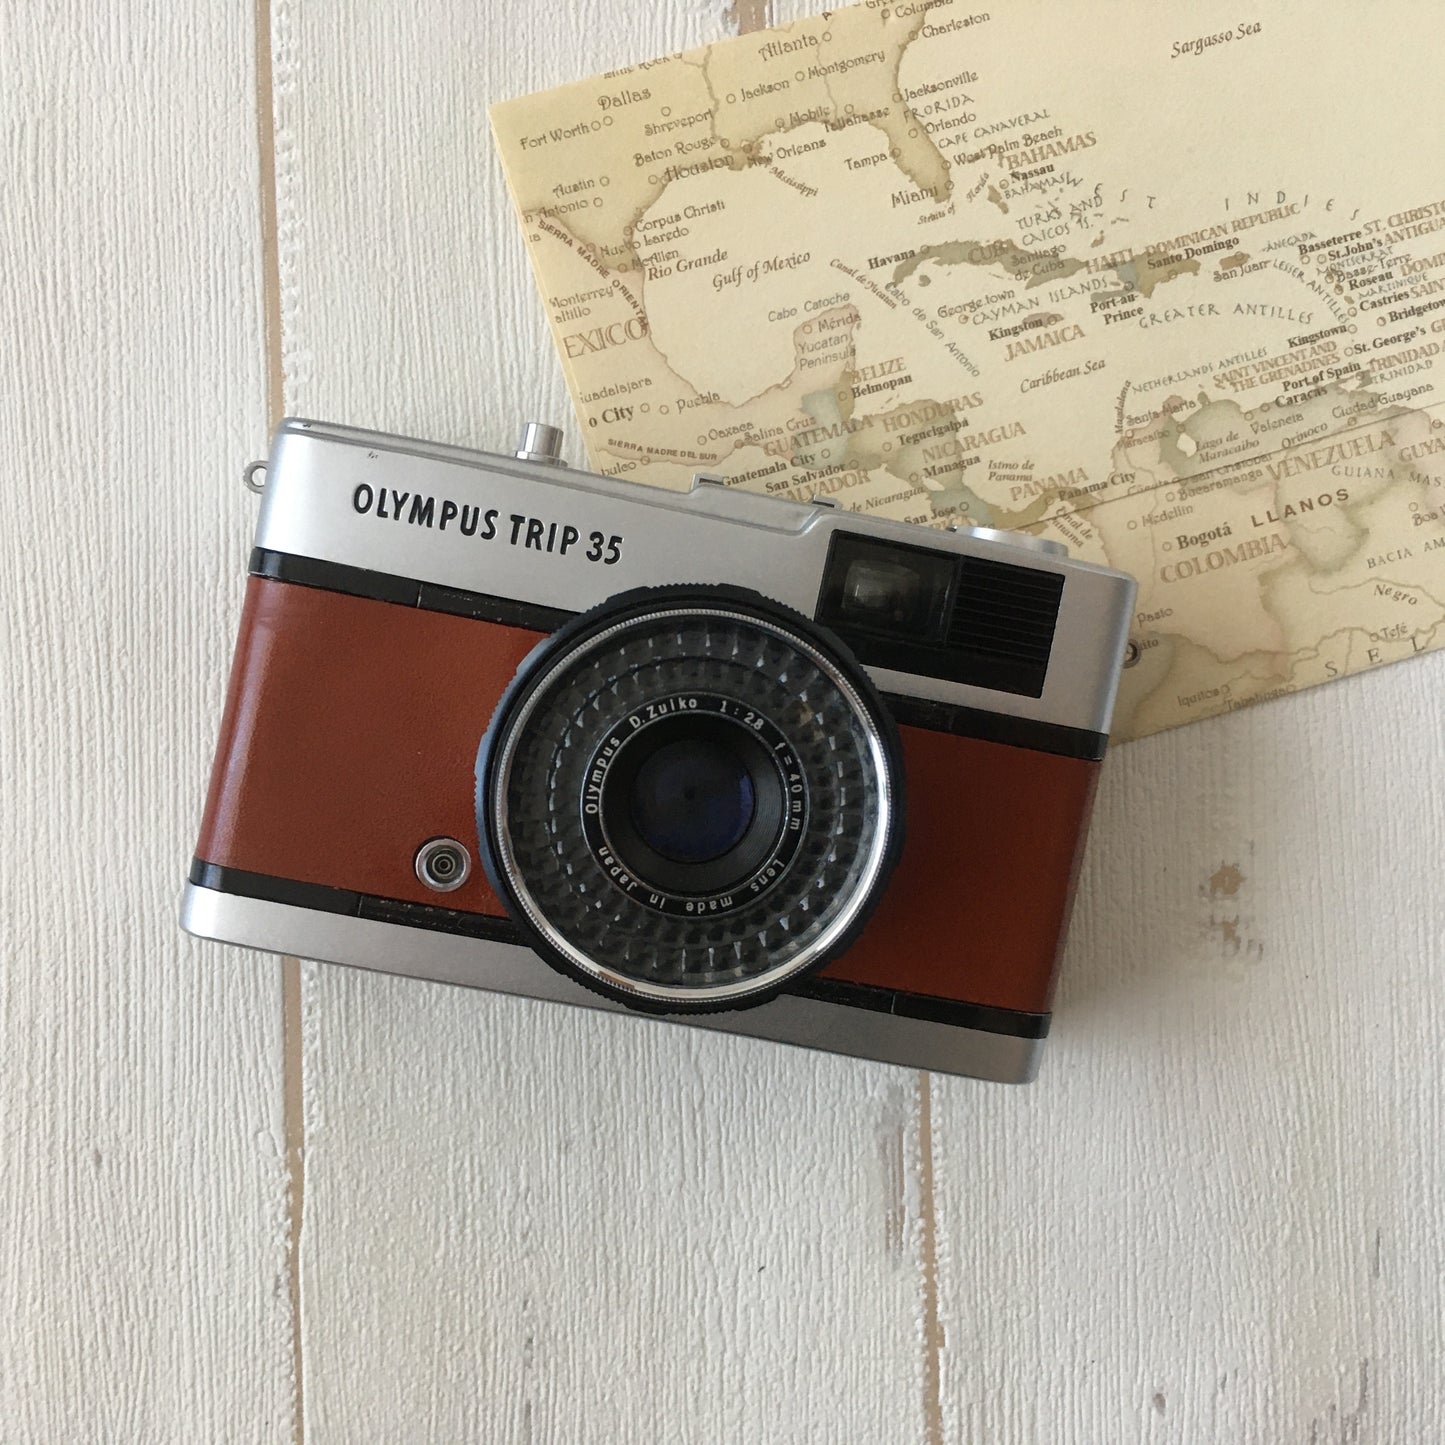 Olympus TRIP35  with russet brown leather